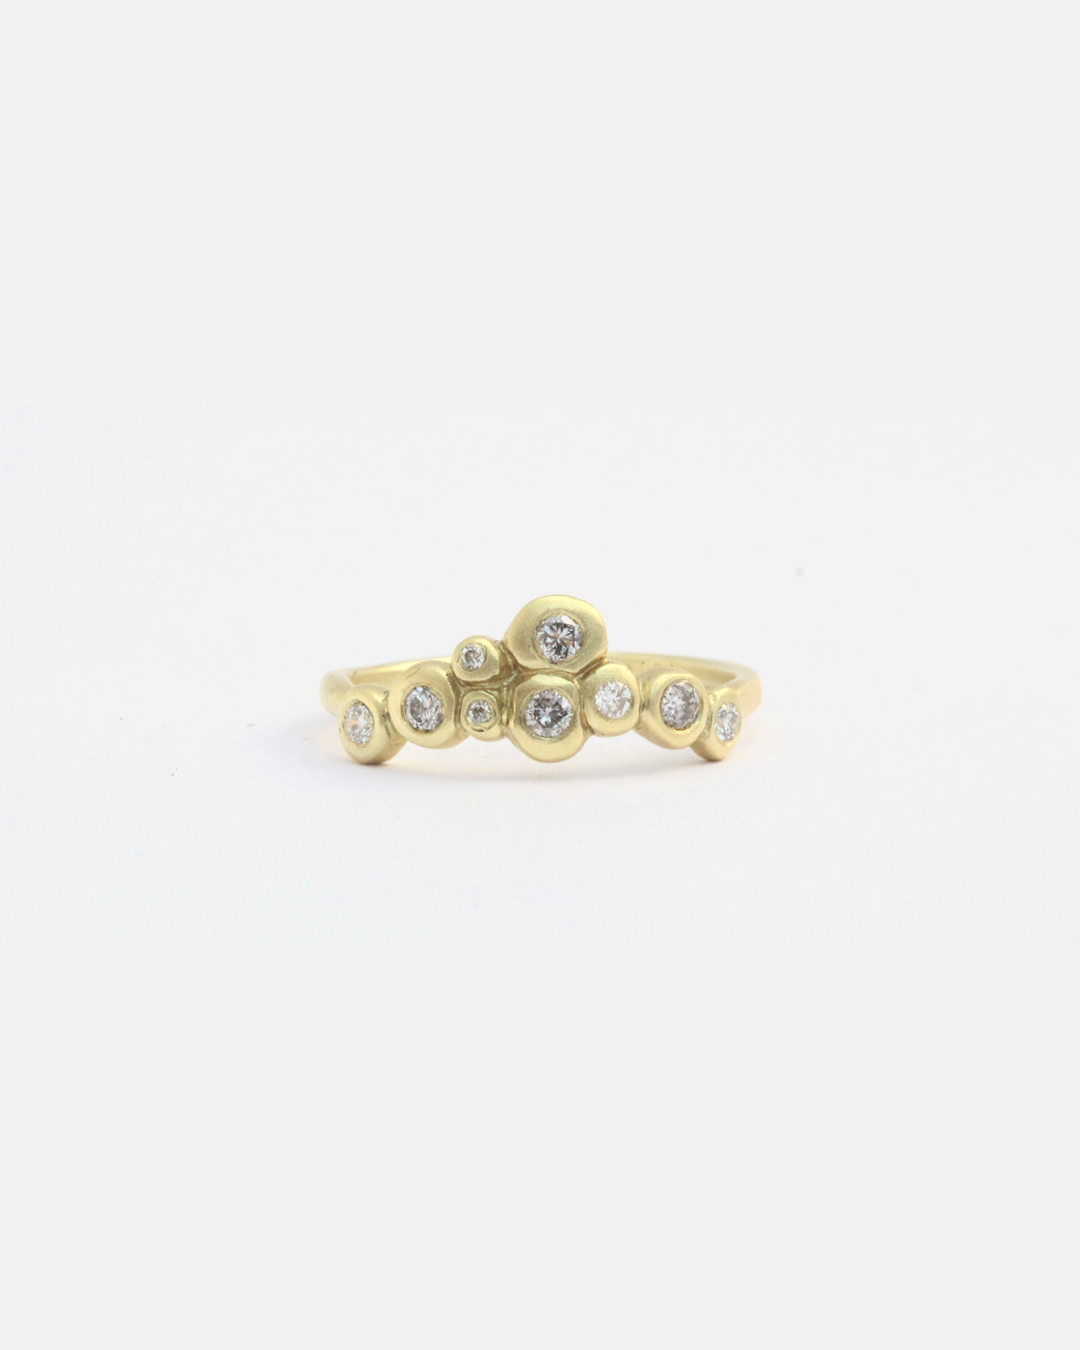 Bubble 8 / Grey and White Diamond Ring By Hiroyo